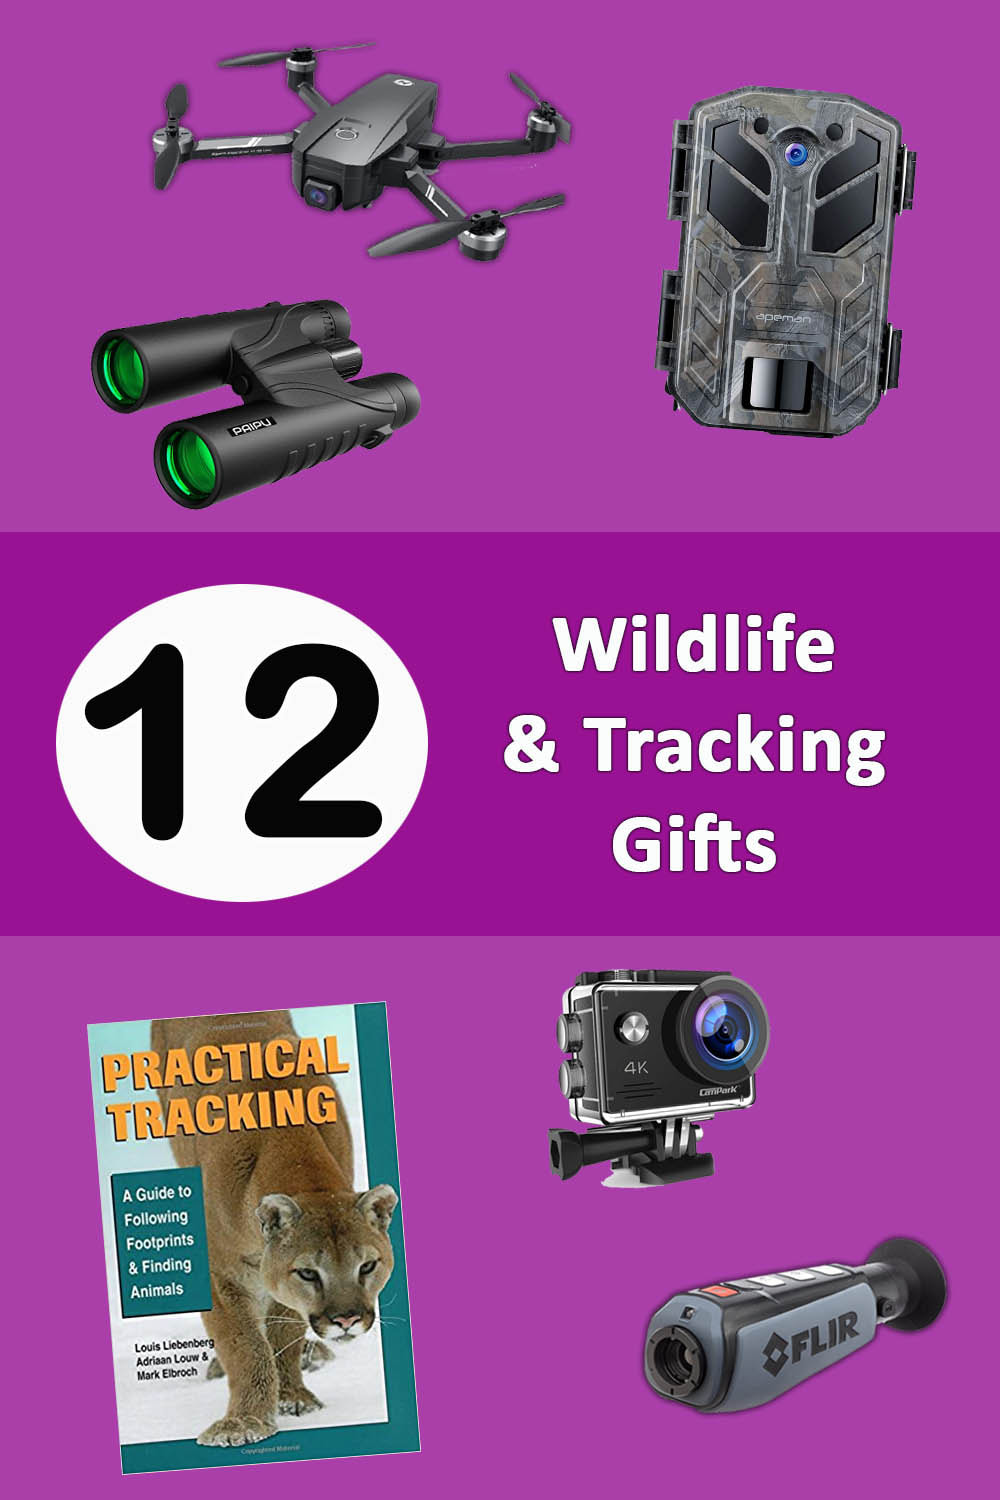 Wildlife & Tracking gifts